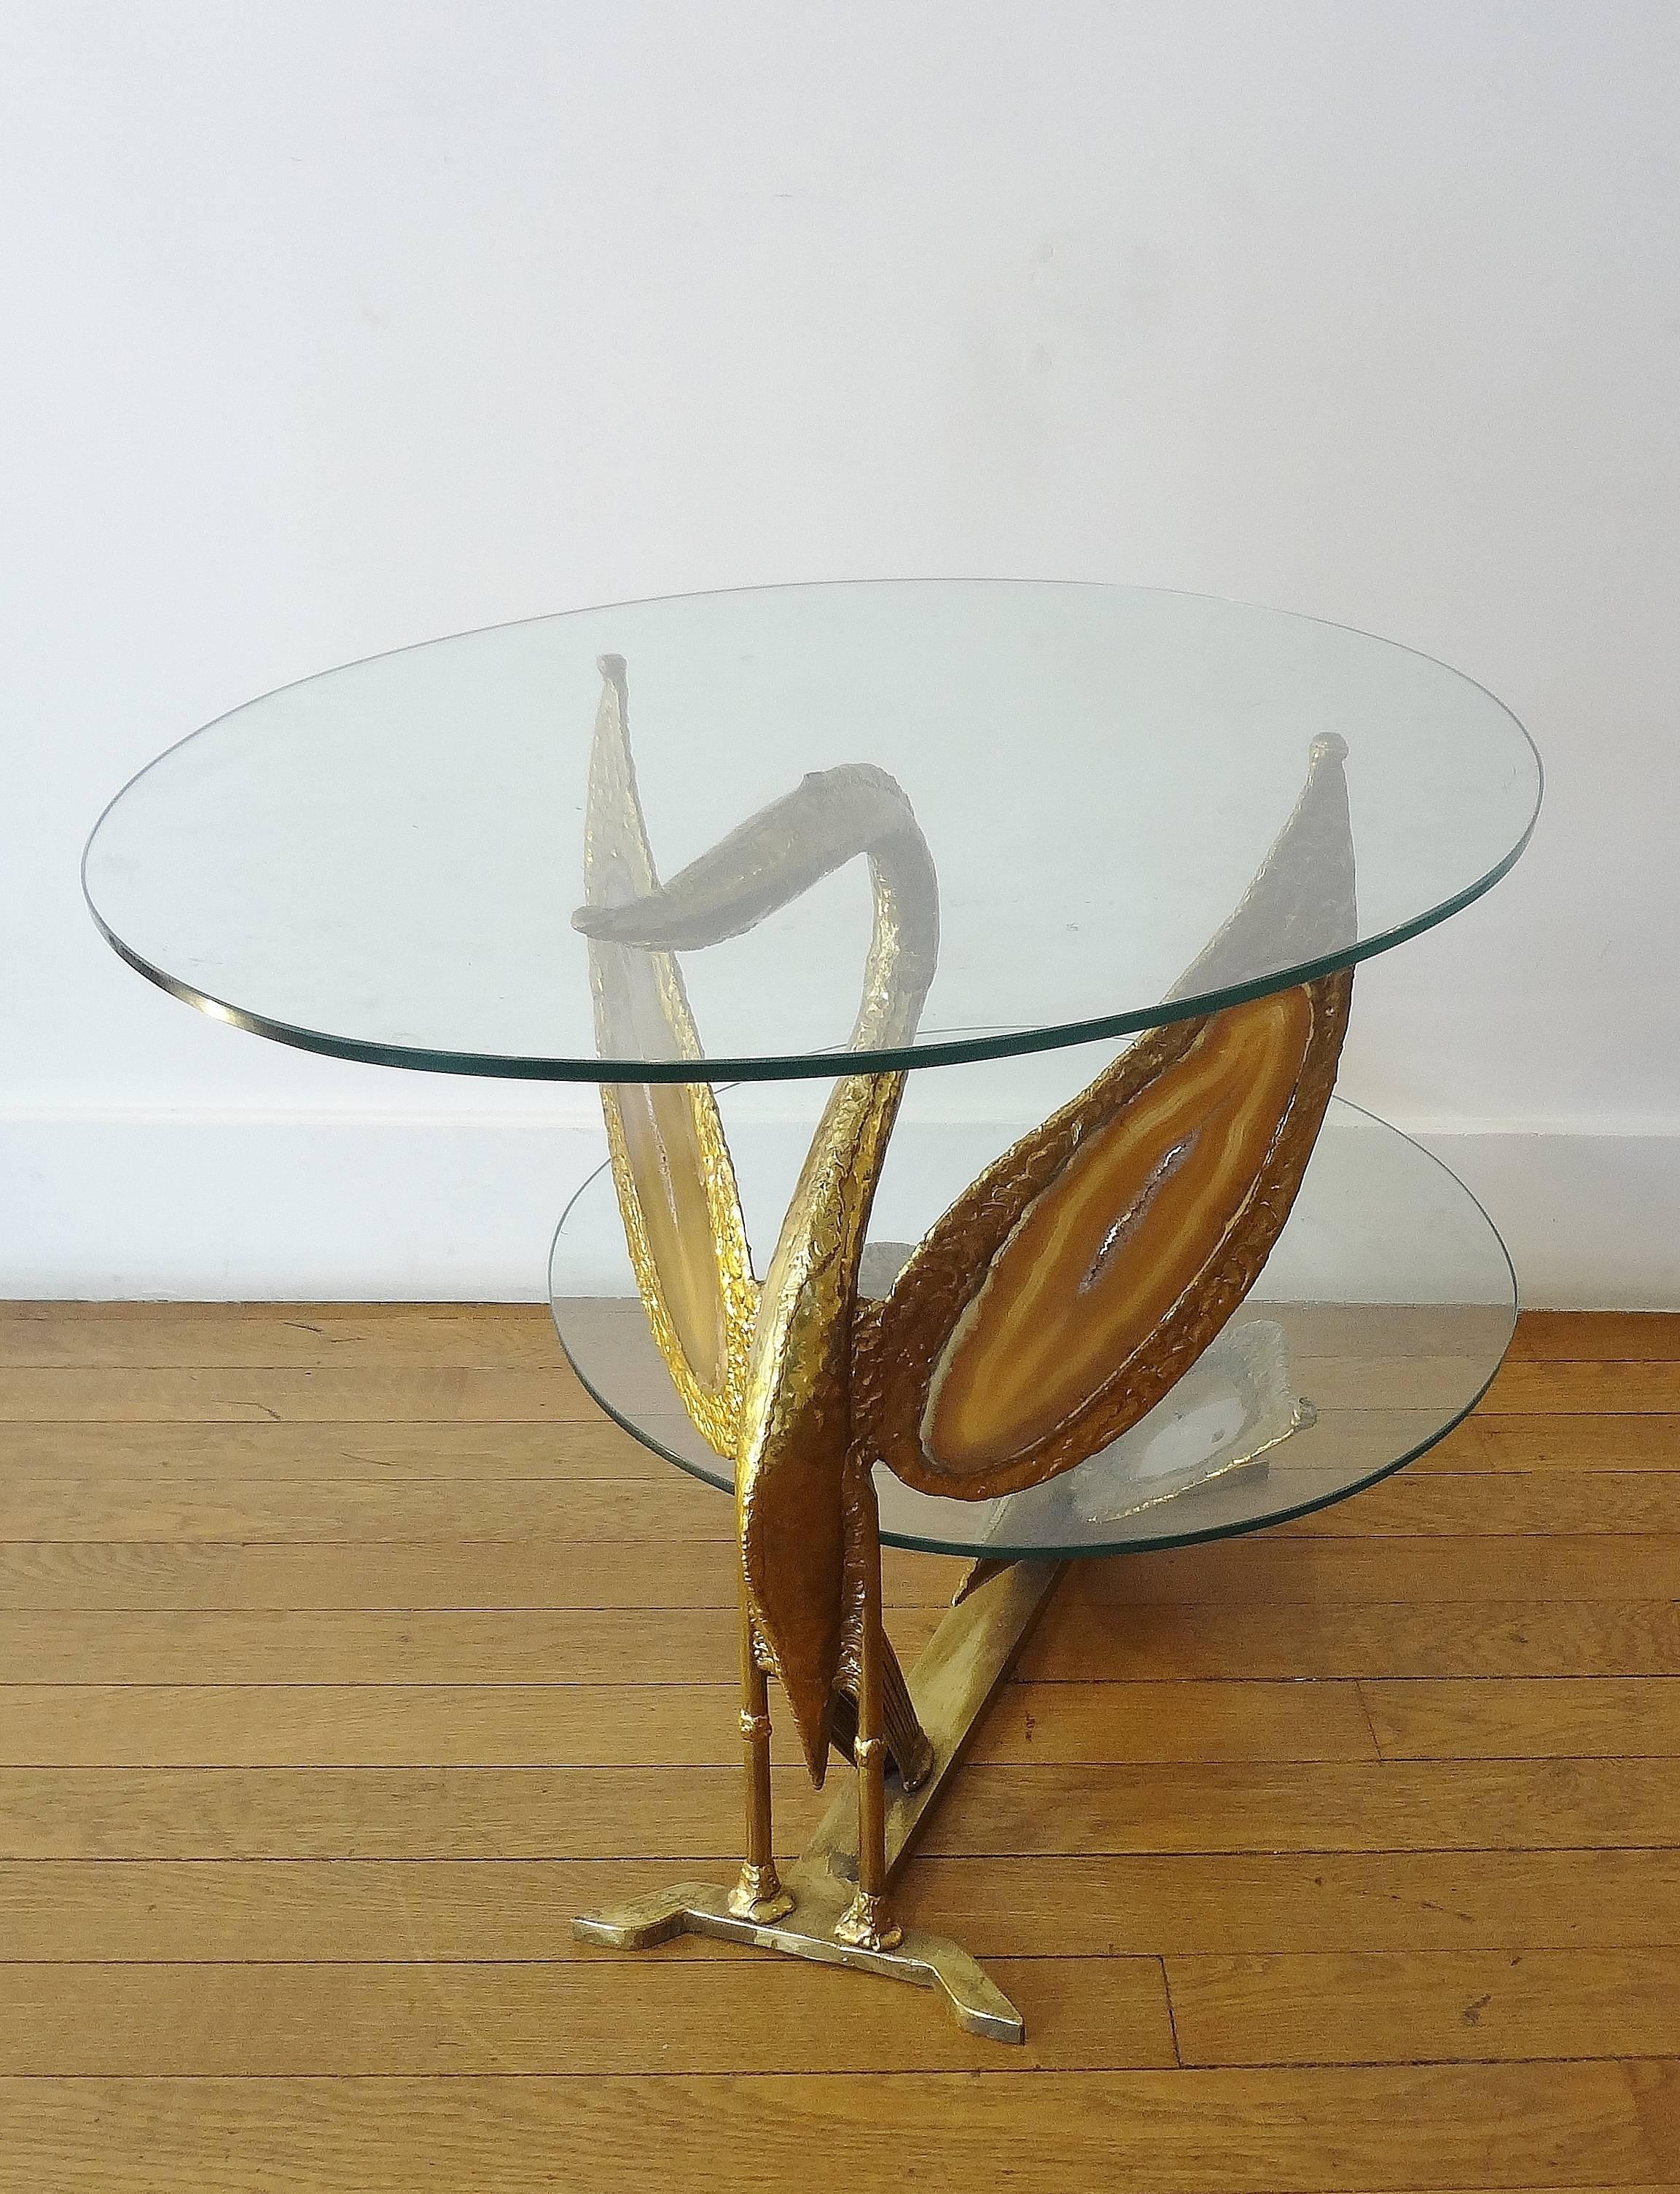 Henri Fernandez
Table basse en cygne-dragon, 1970s. 
Fantastic coffee table with two oval glass tops, 1970s
On a gilt brass and agate slices dragoon, swan sculpted base. 
Unique piece. Signed.  Under top at height 24 cm.

Henri Fernandez is a French